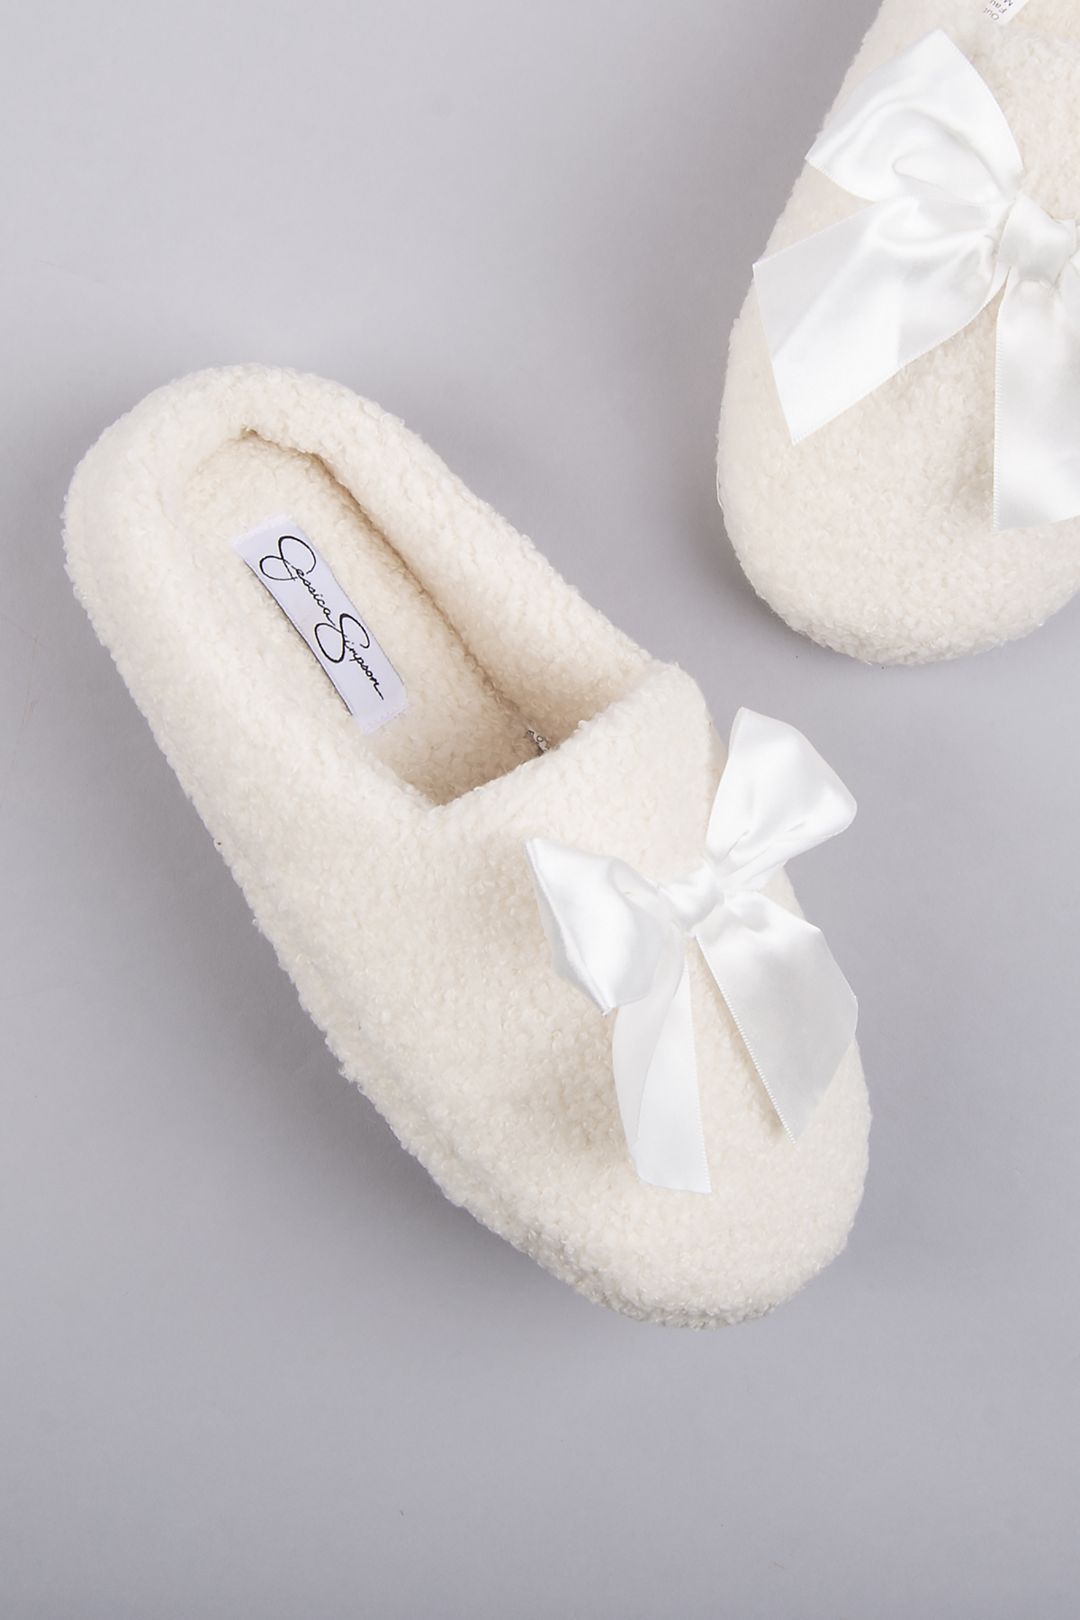 Jessica Simpson Shearling Slippers with Satin Bow Image 1